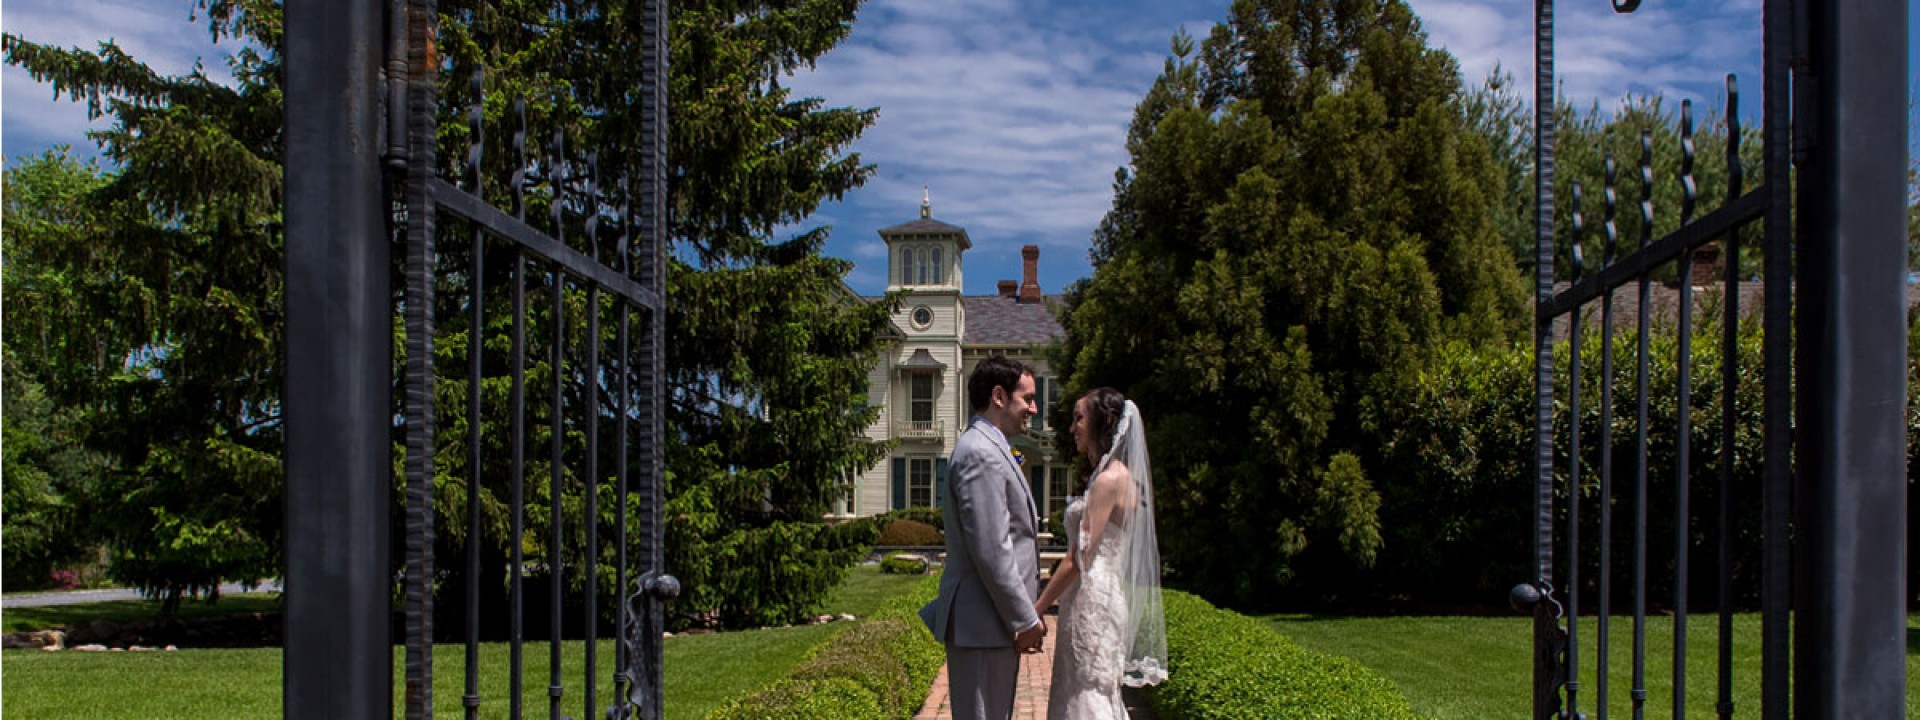 Bride and groom at the gate, Lisa Nicolosi photography